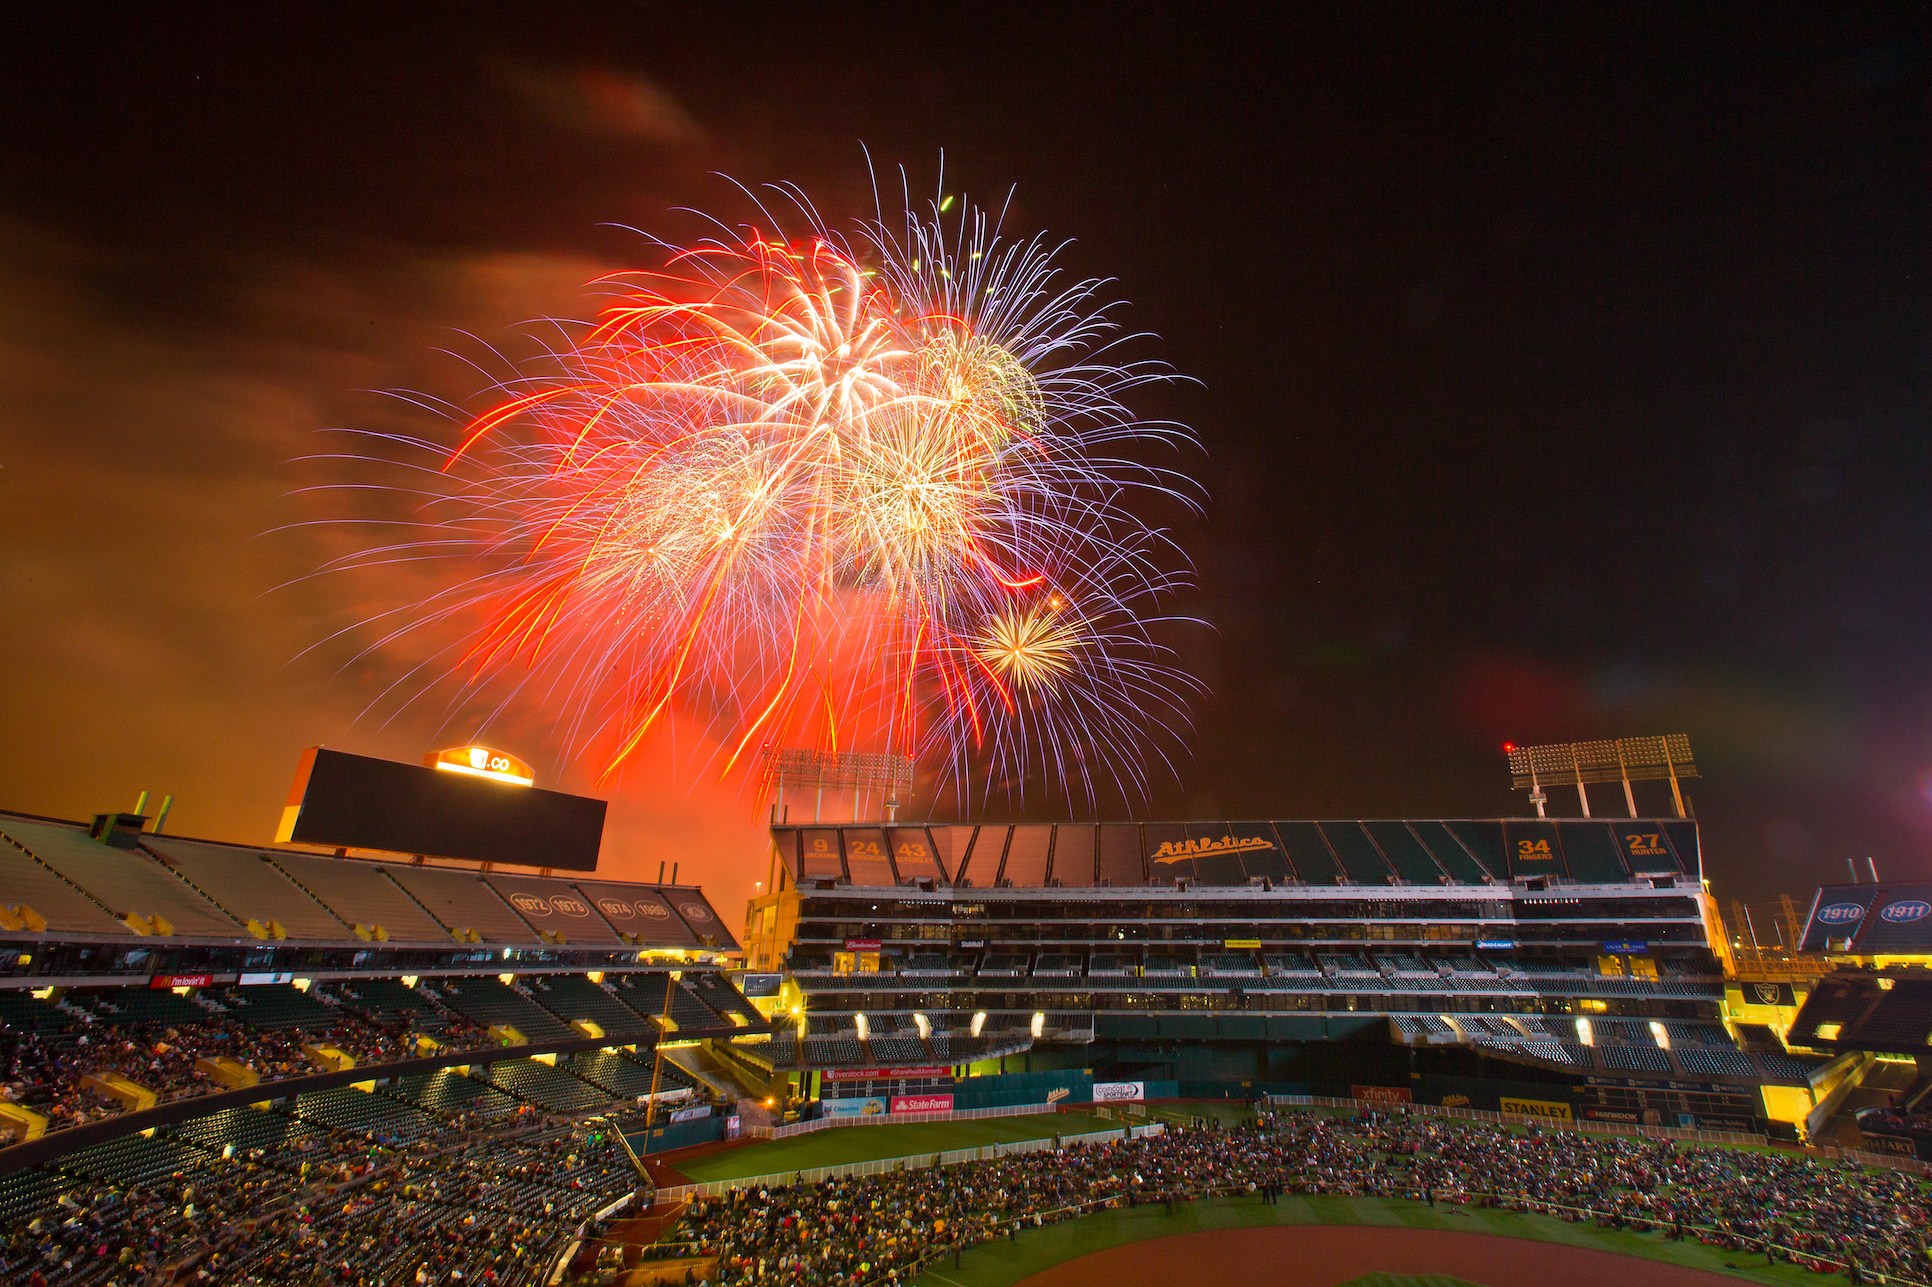 OAKLAND, CA - JUNE 19: Fans crowd onto the field for fireworks after a game between the Oakland Athletics and the Los Angeles Angels of Anaheim at O.co Coliseum on June 19, 2015 in Oakland, California. The Angels won 12-7. (Photo by Brian Bahr/Getty Images)